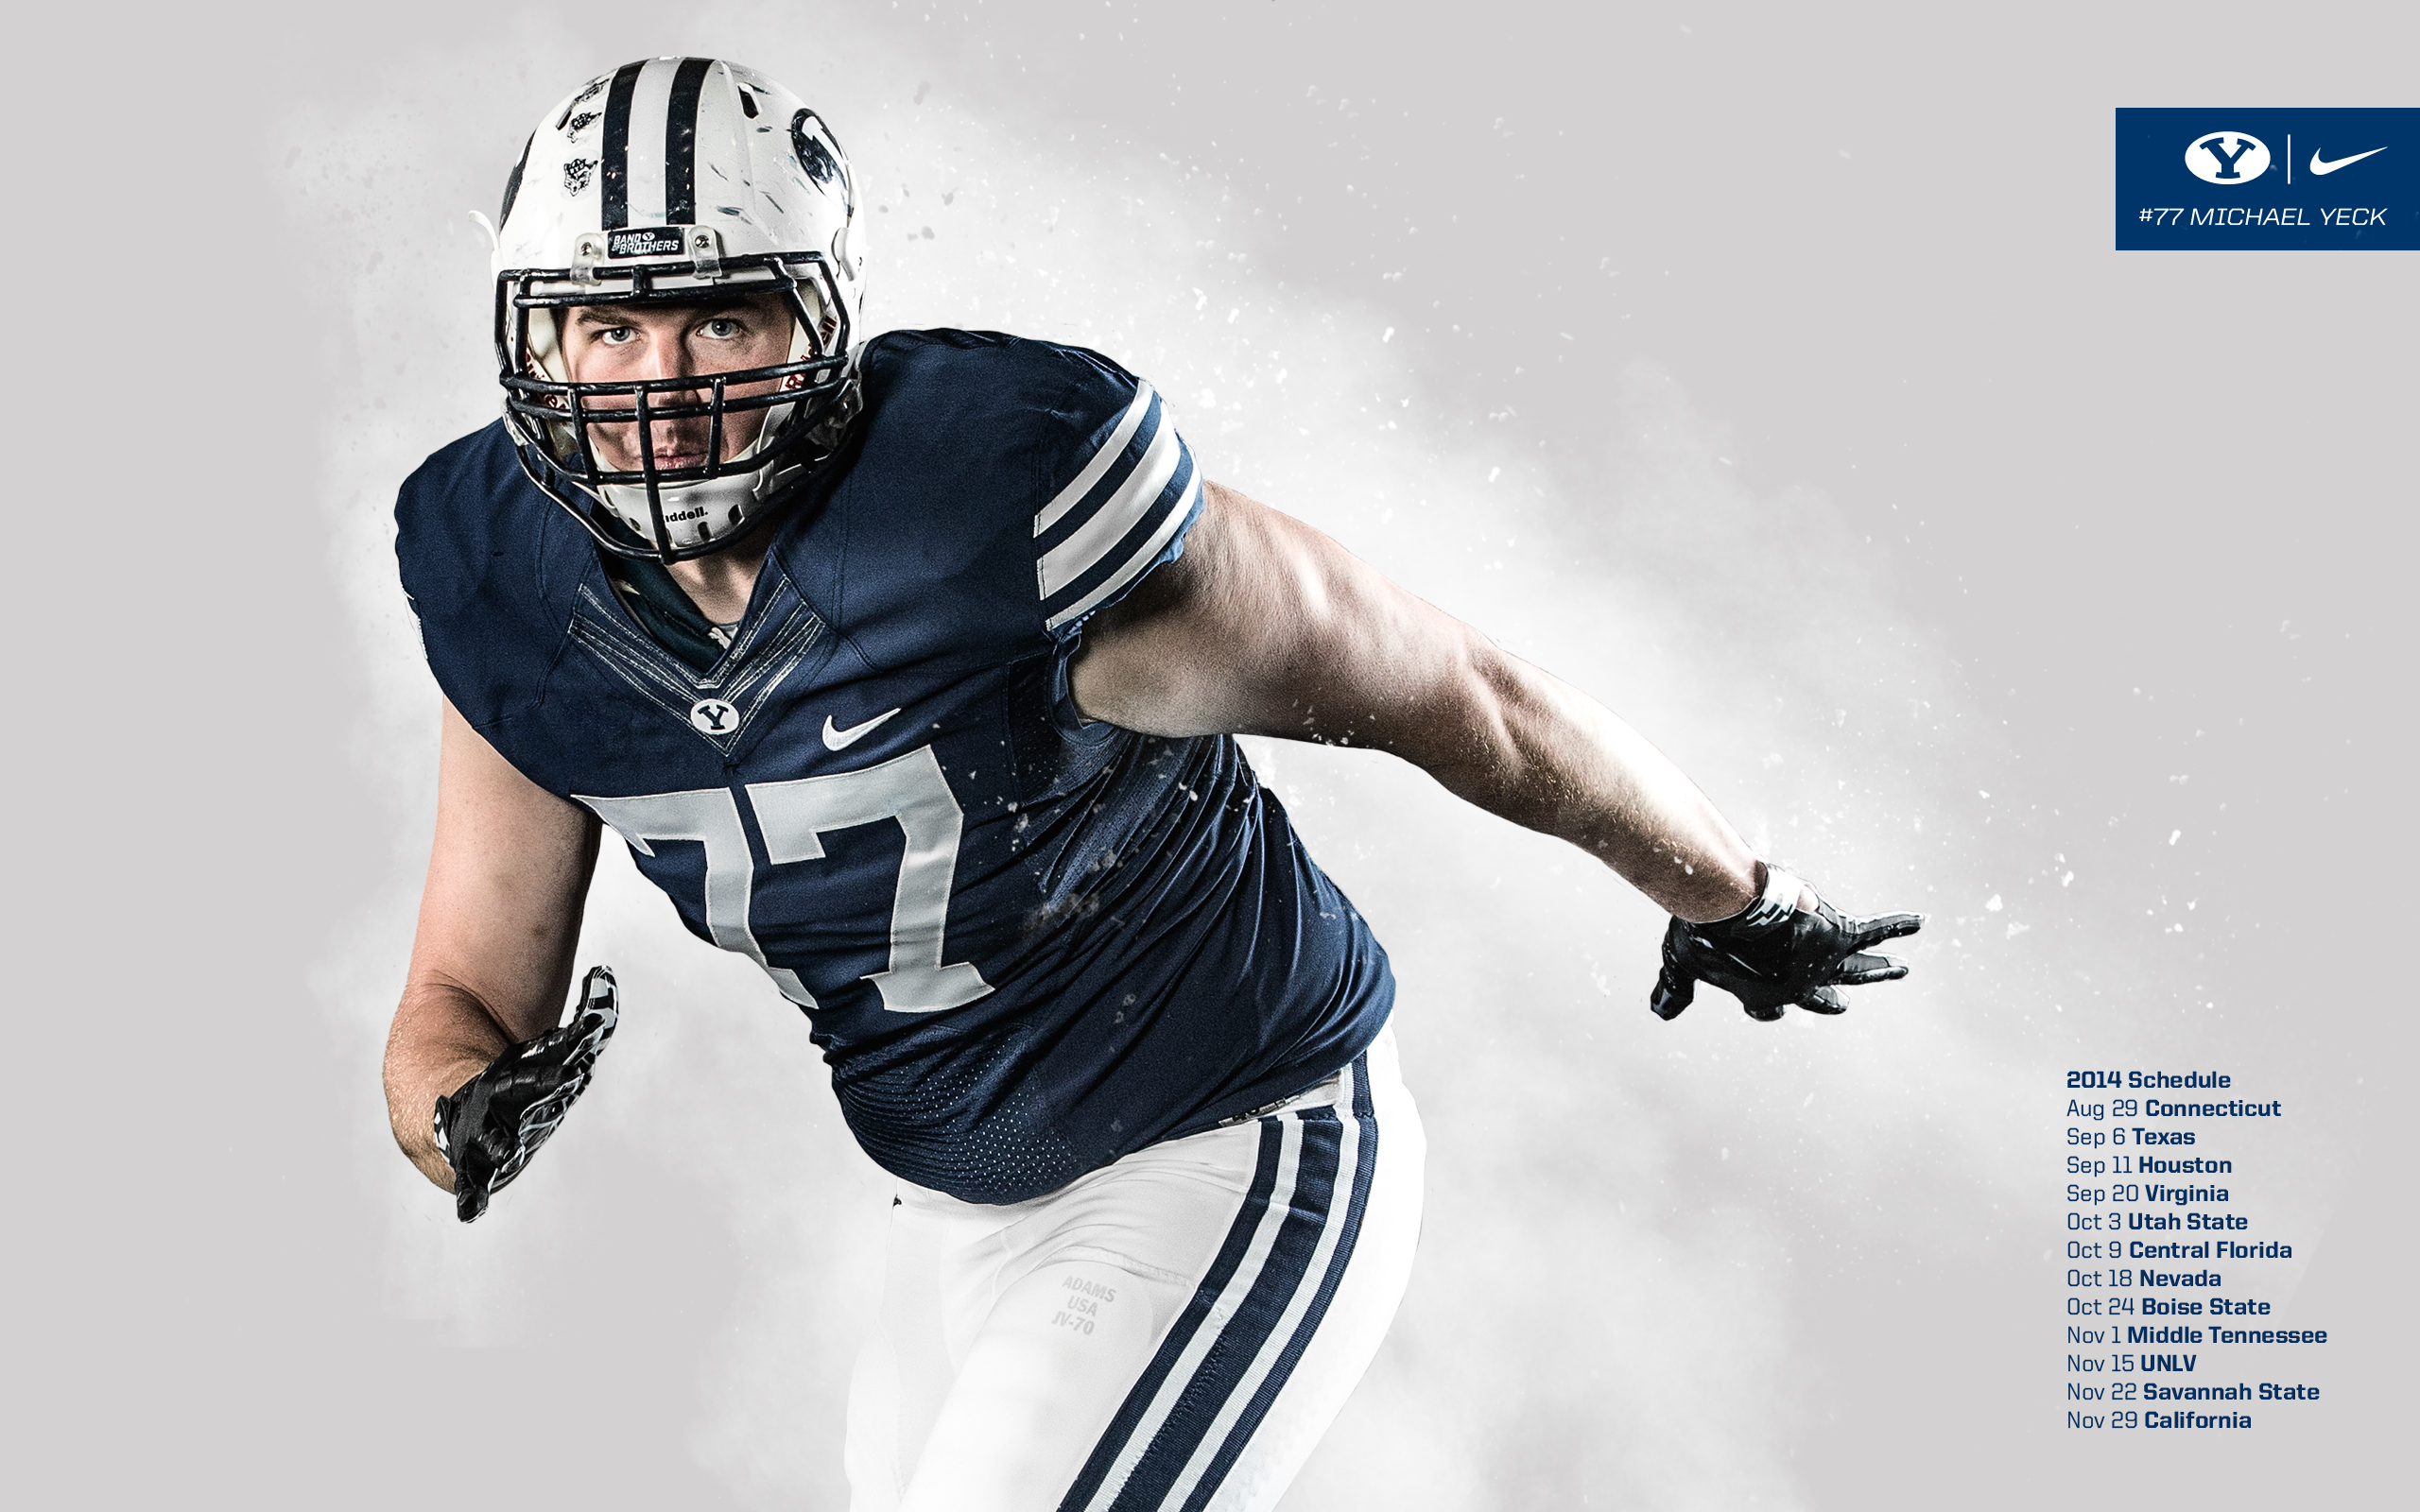 Men S Football Wallpaper The Official Site Of Byu Athletics